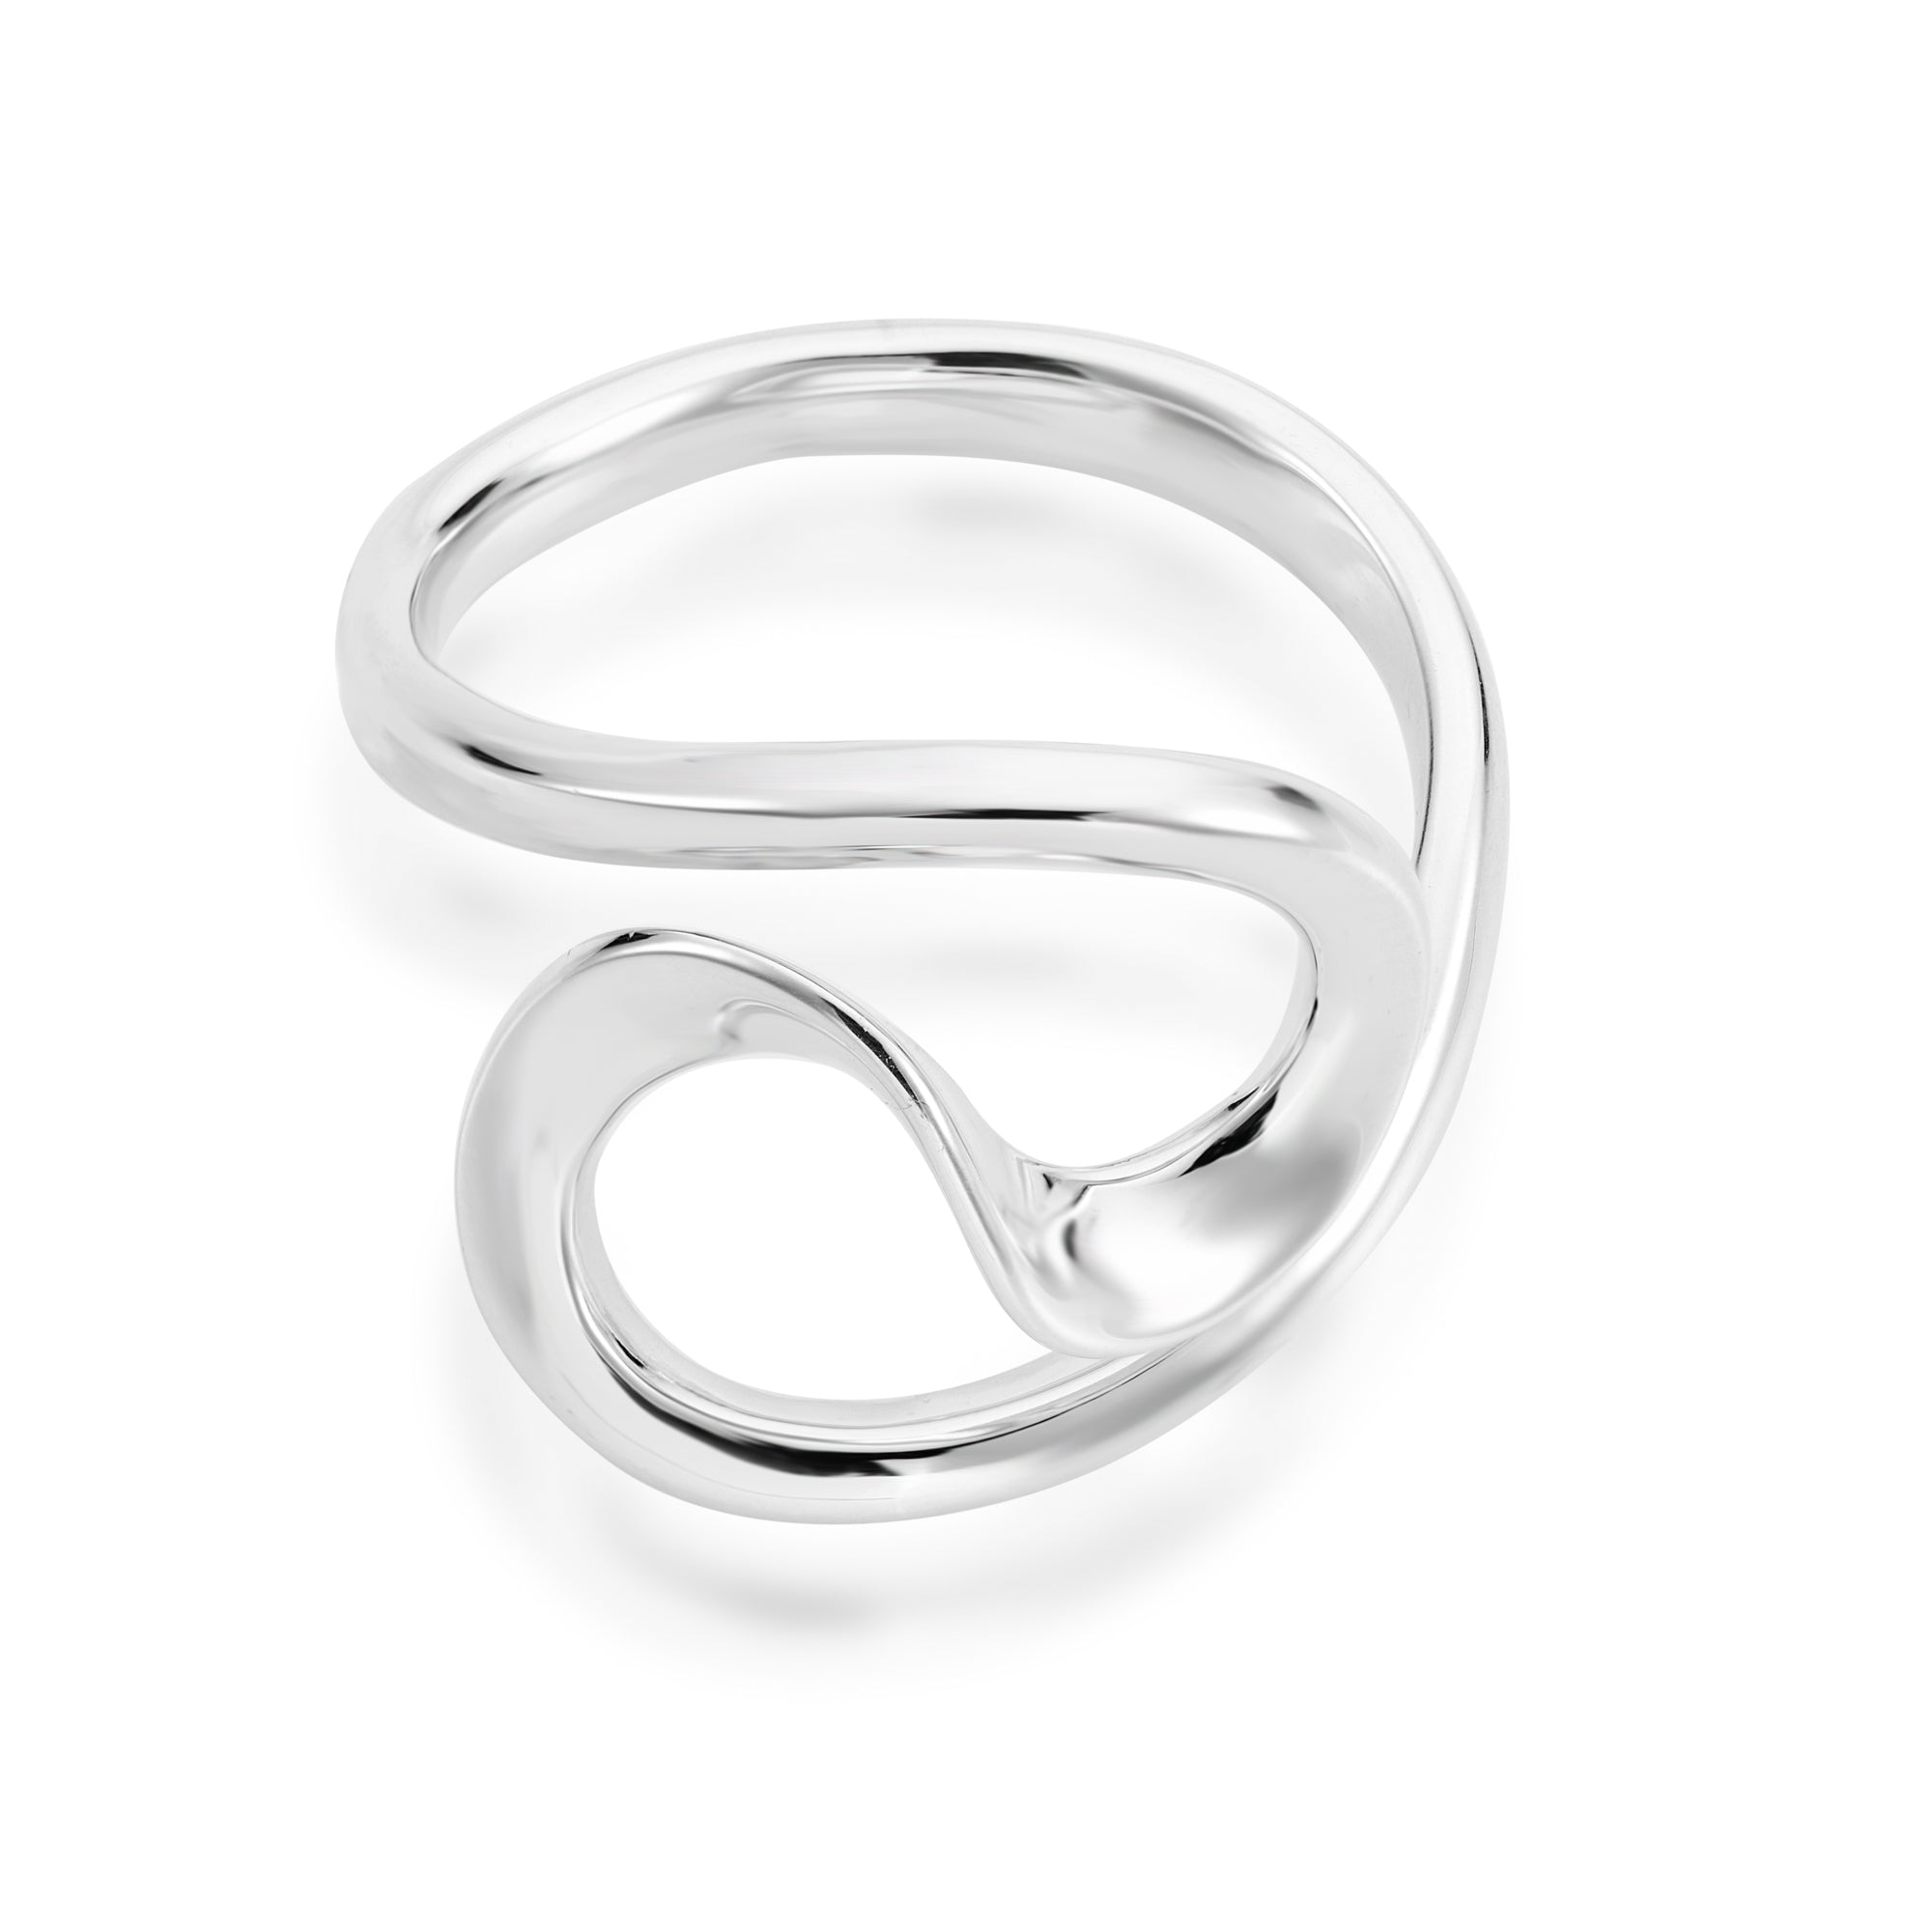 Handmade Silver Curved Bethan Ring